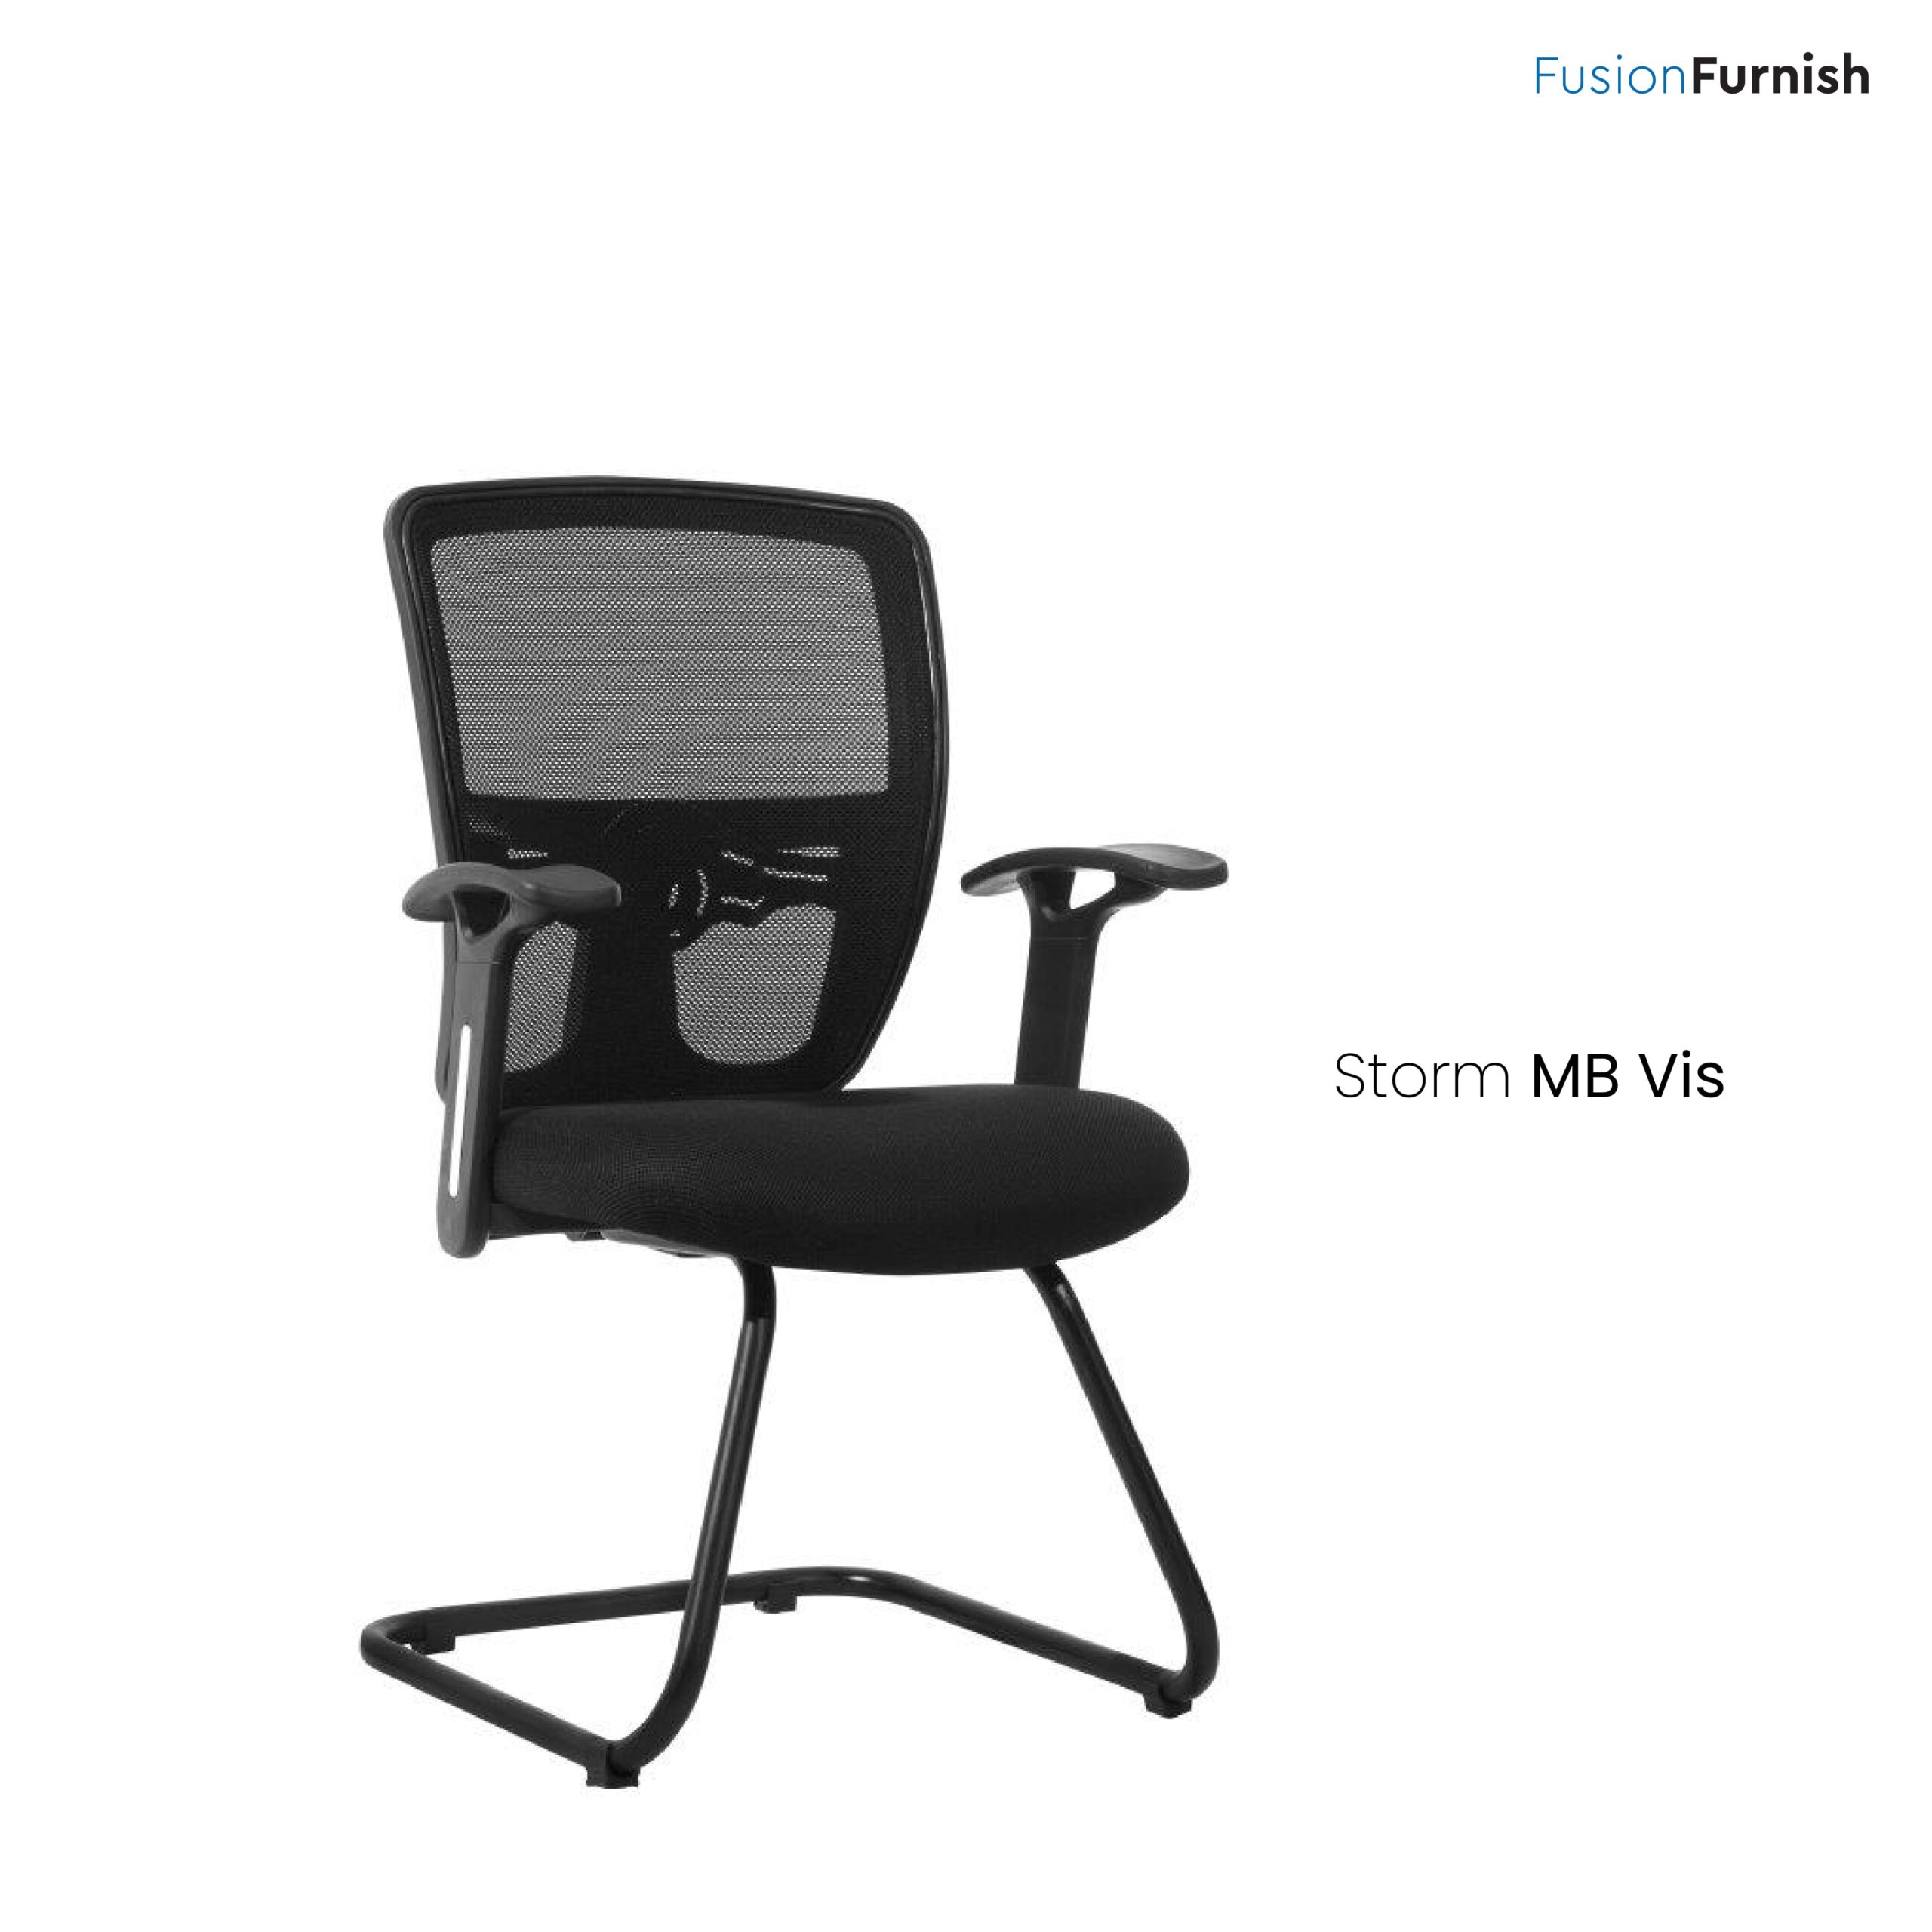 Optima High BackWith the full-length design and the support for natural posture, you are sure that the chair will help enhance your posture.